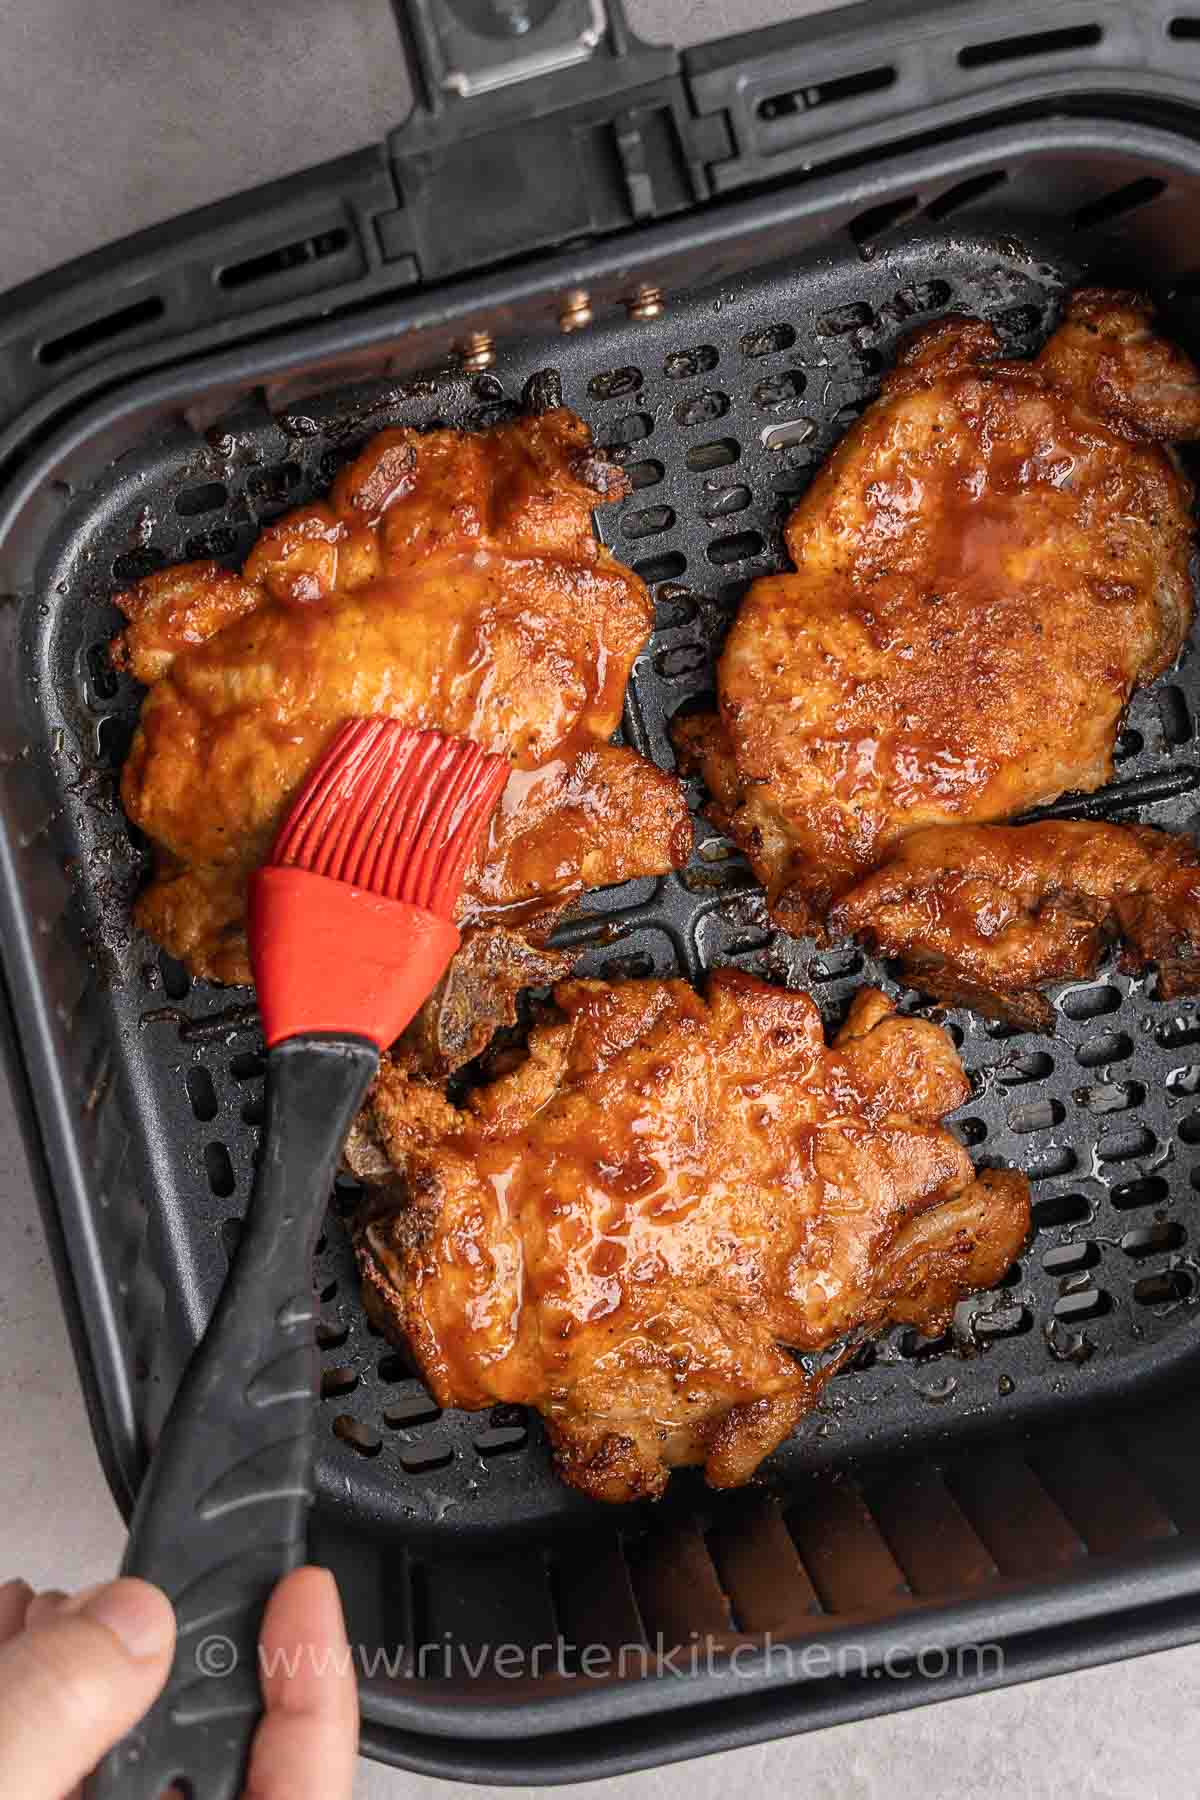 Pork chops with barbecue sauce.